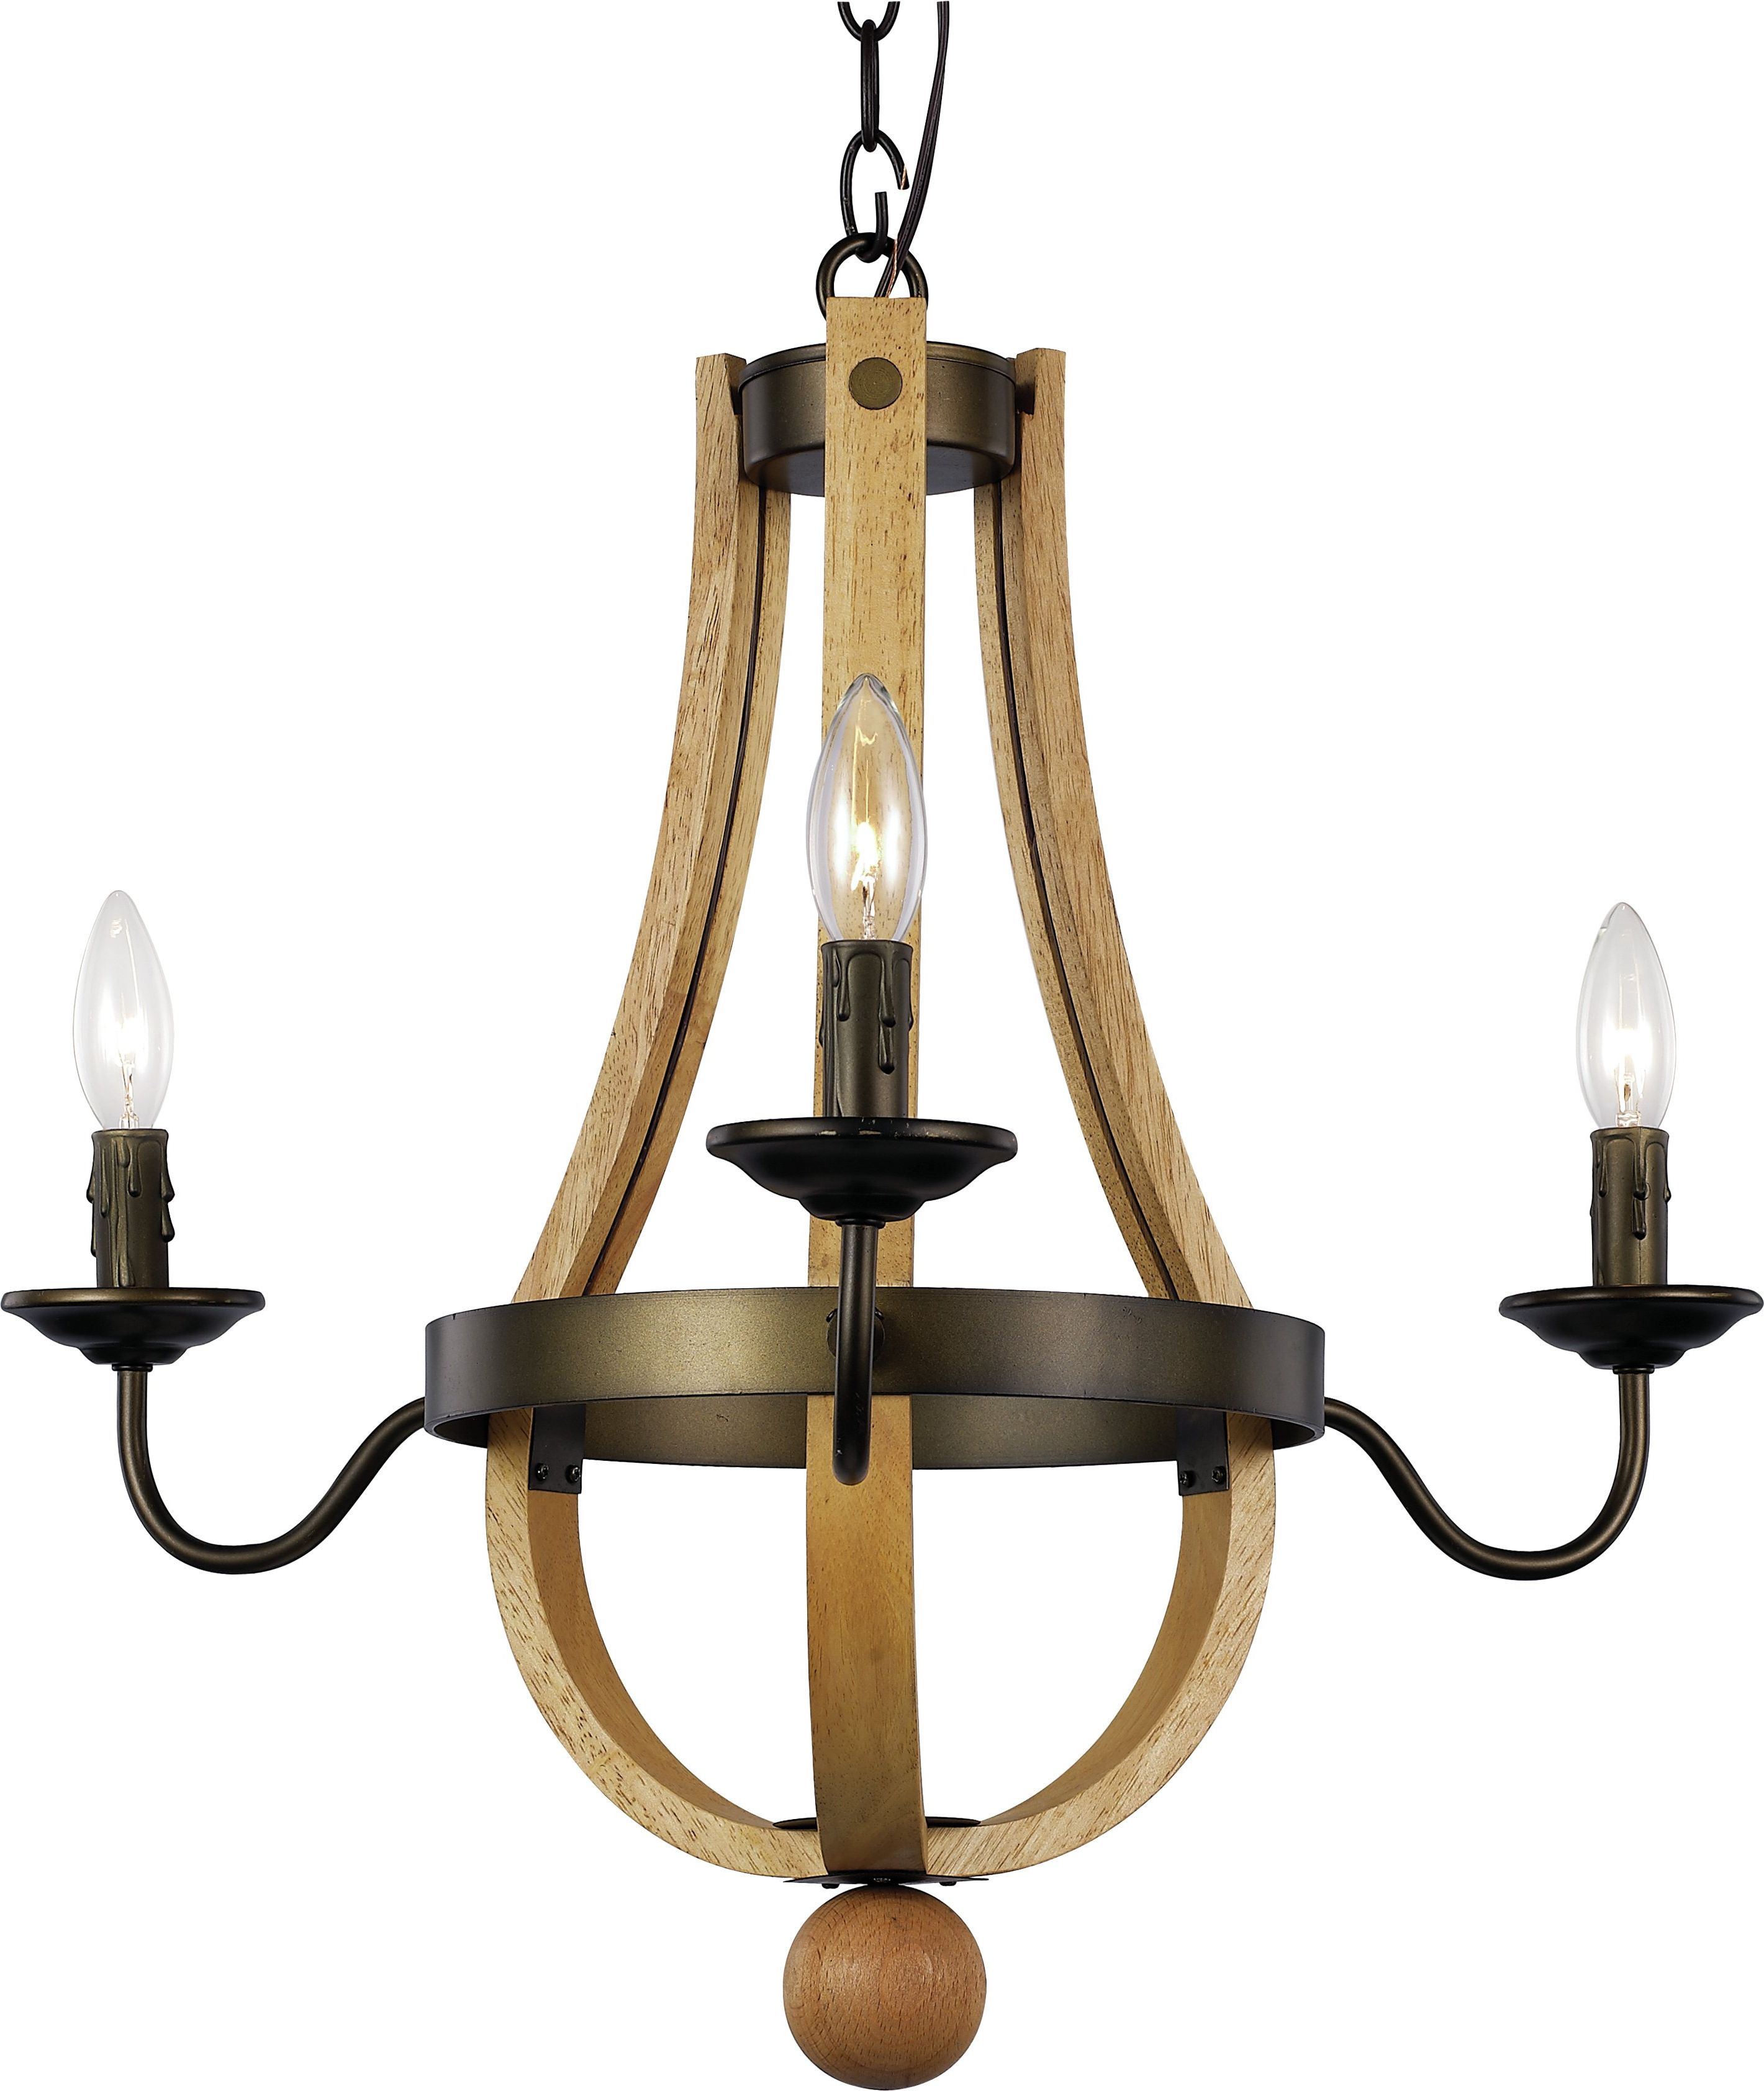 Finnick 3 Light Lantern Pendants Throughout Most Recently Released Dimitri 3 Light Empire Chandelier (View 20 of 25)